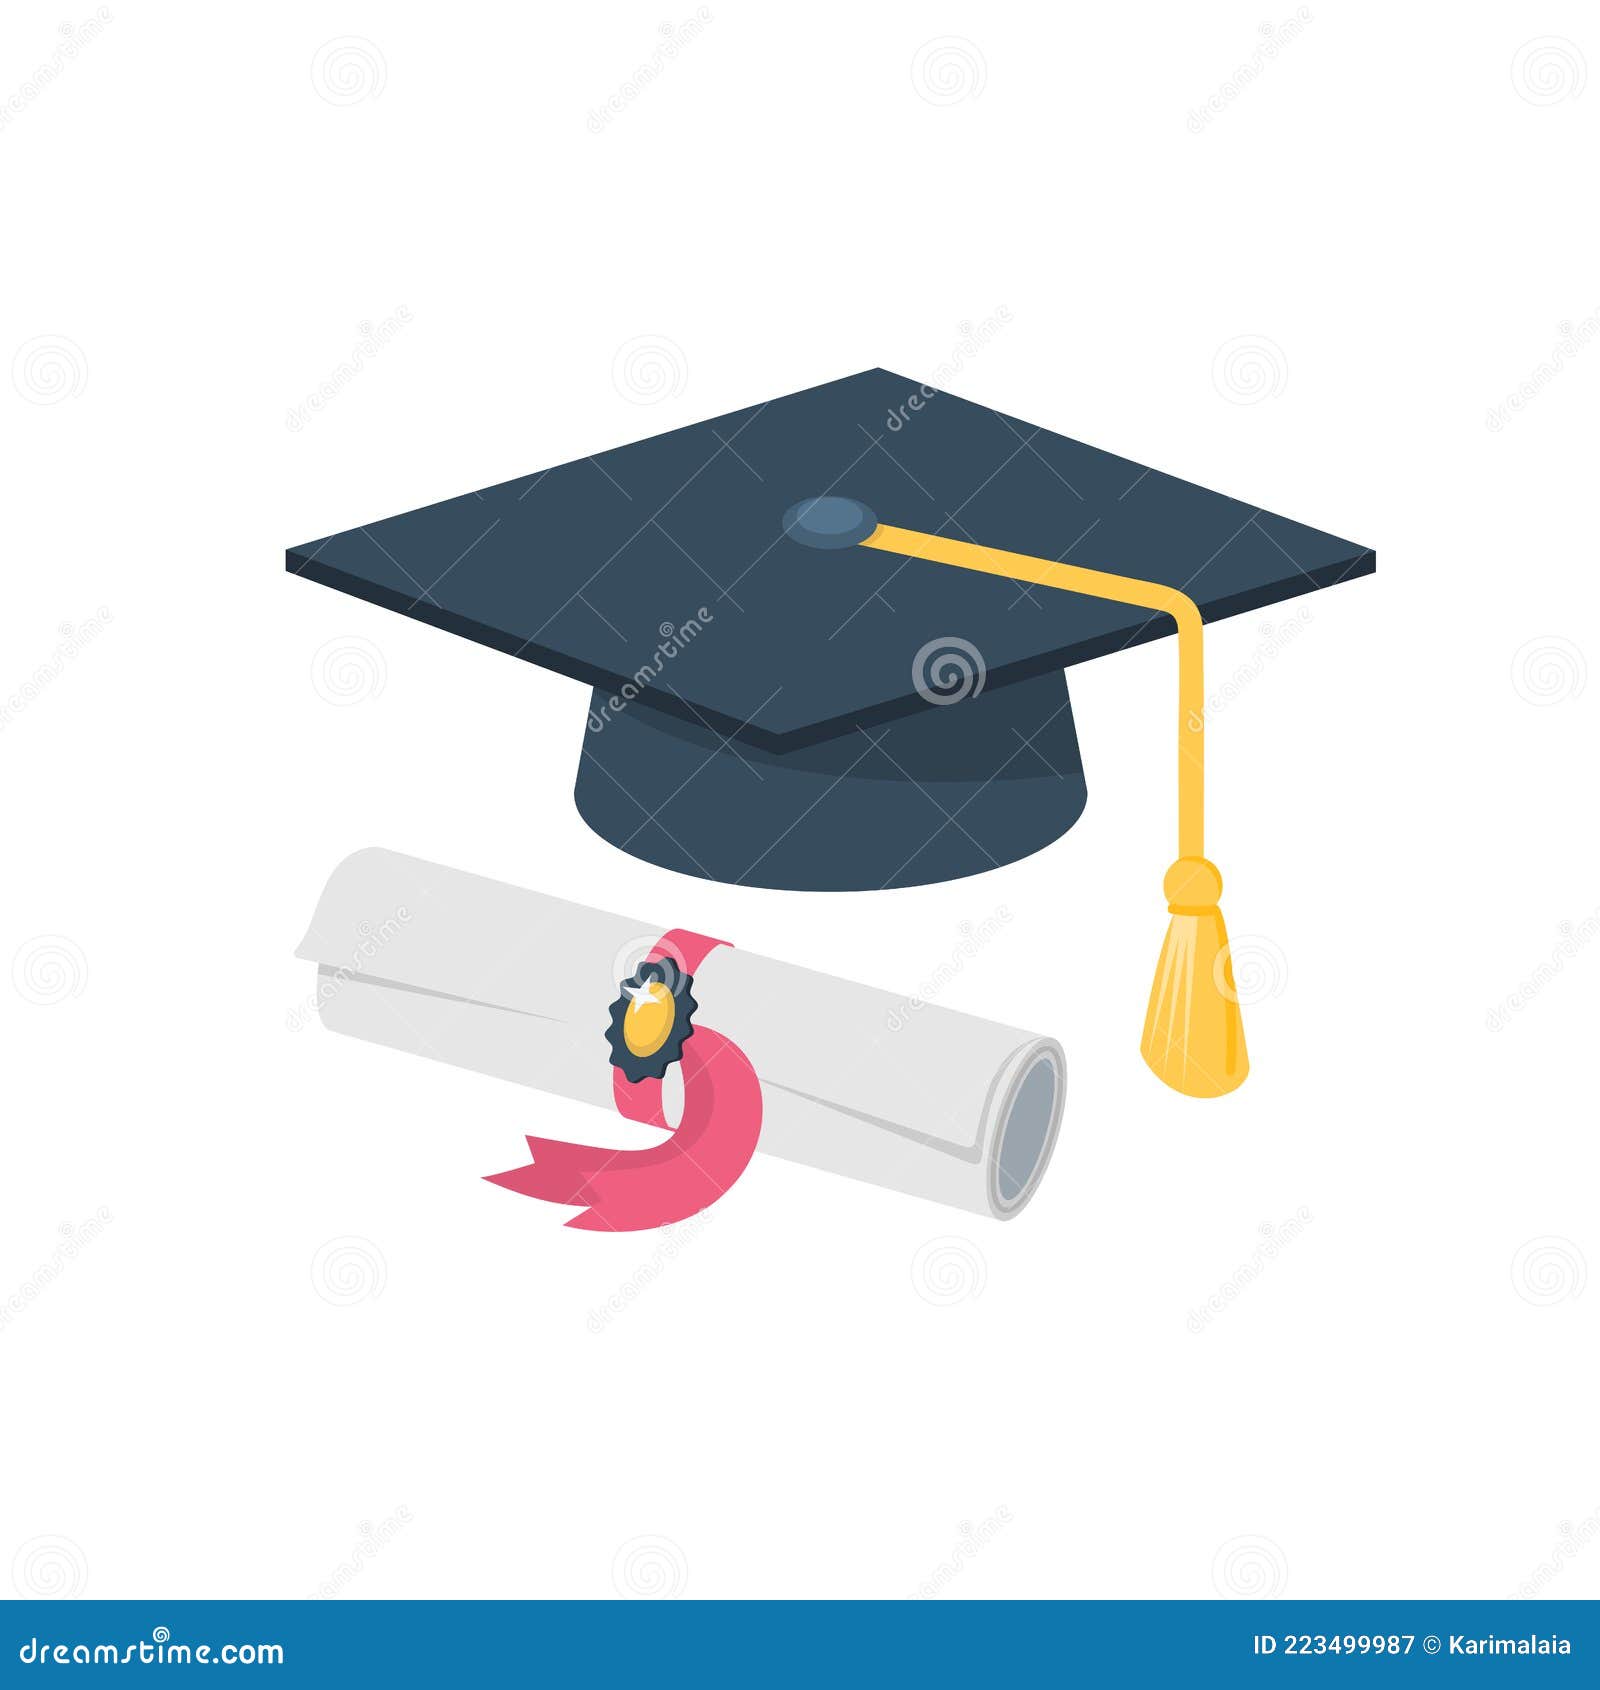 Graduation cap and diploma stock vector. Illustration of learn - 223499987